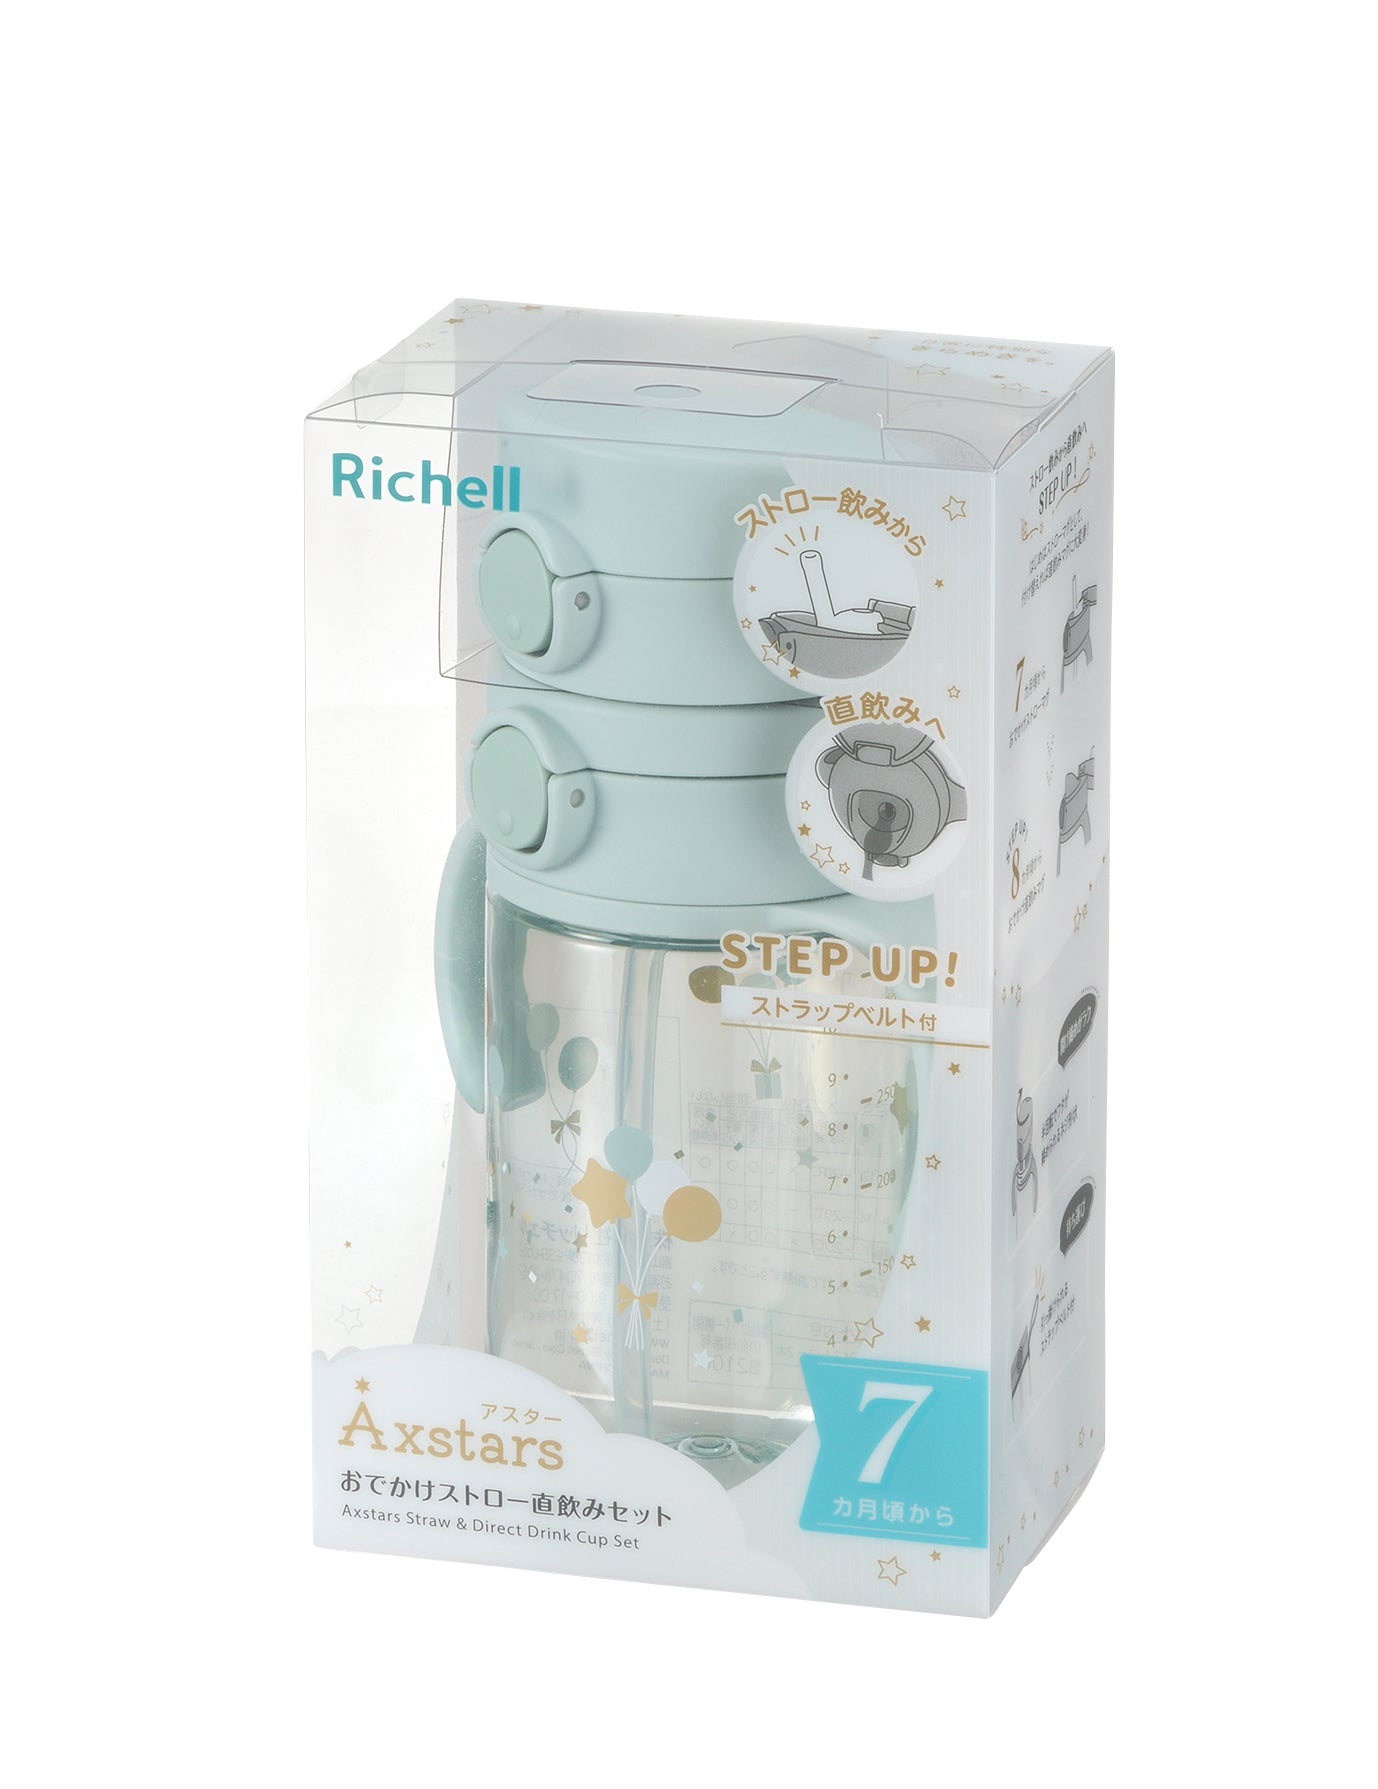 Richell Axstars Straw & Direct Drink Cup Set